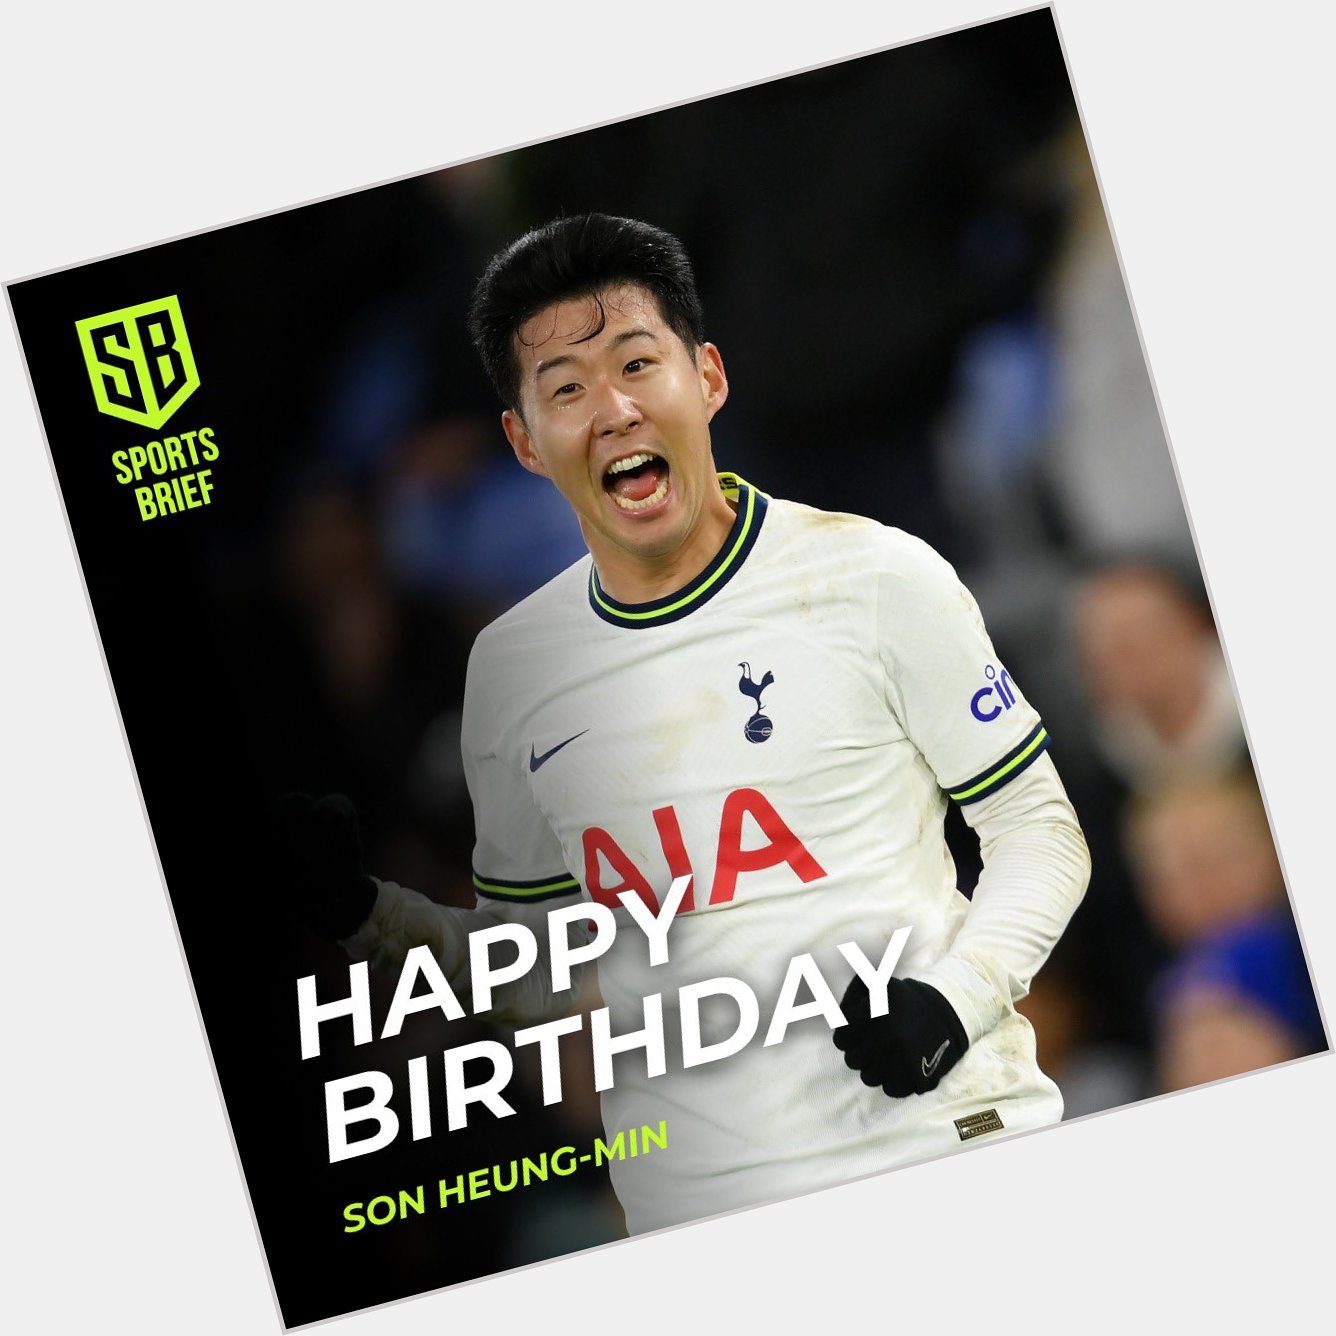 Happy 31st birthday to one of South Korea s finest, Son Heung-min    : Mike Hewitt (Getty Images) 